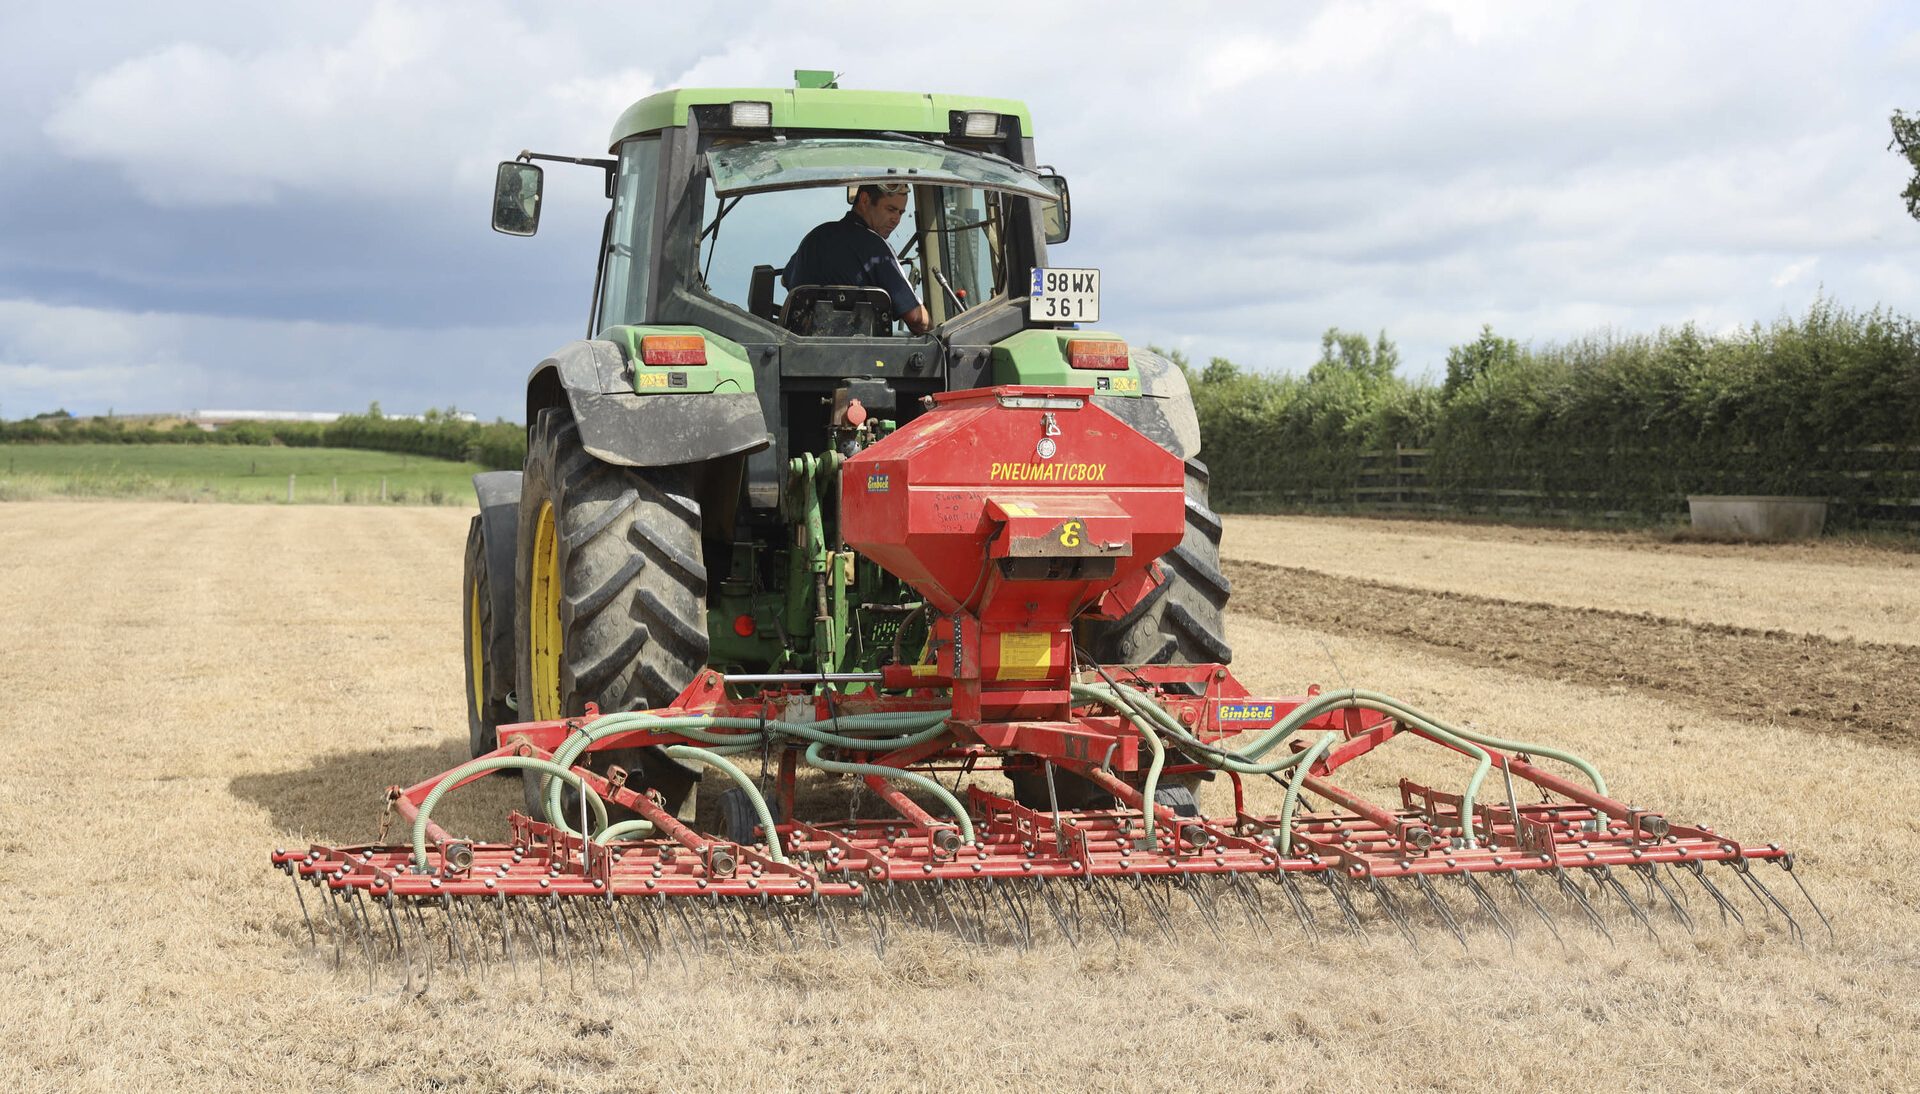 Tractor direct drilling seed in a field.